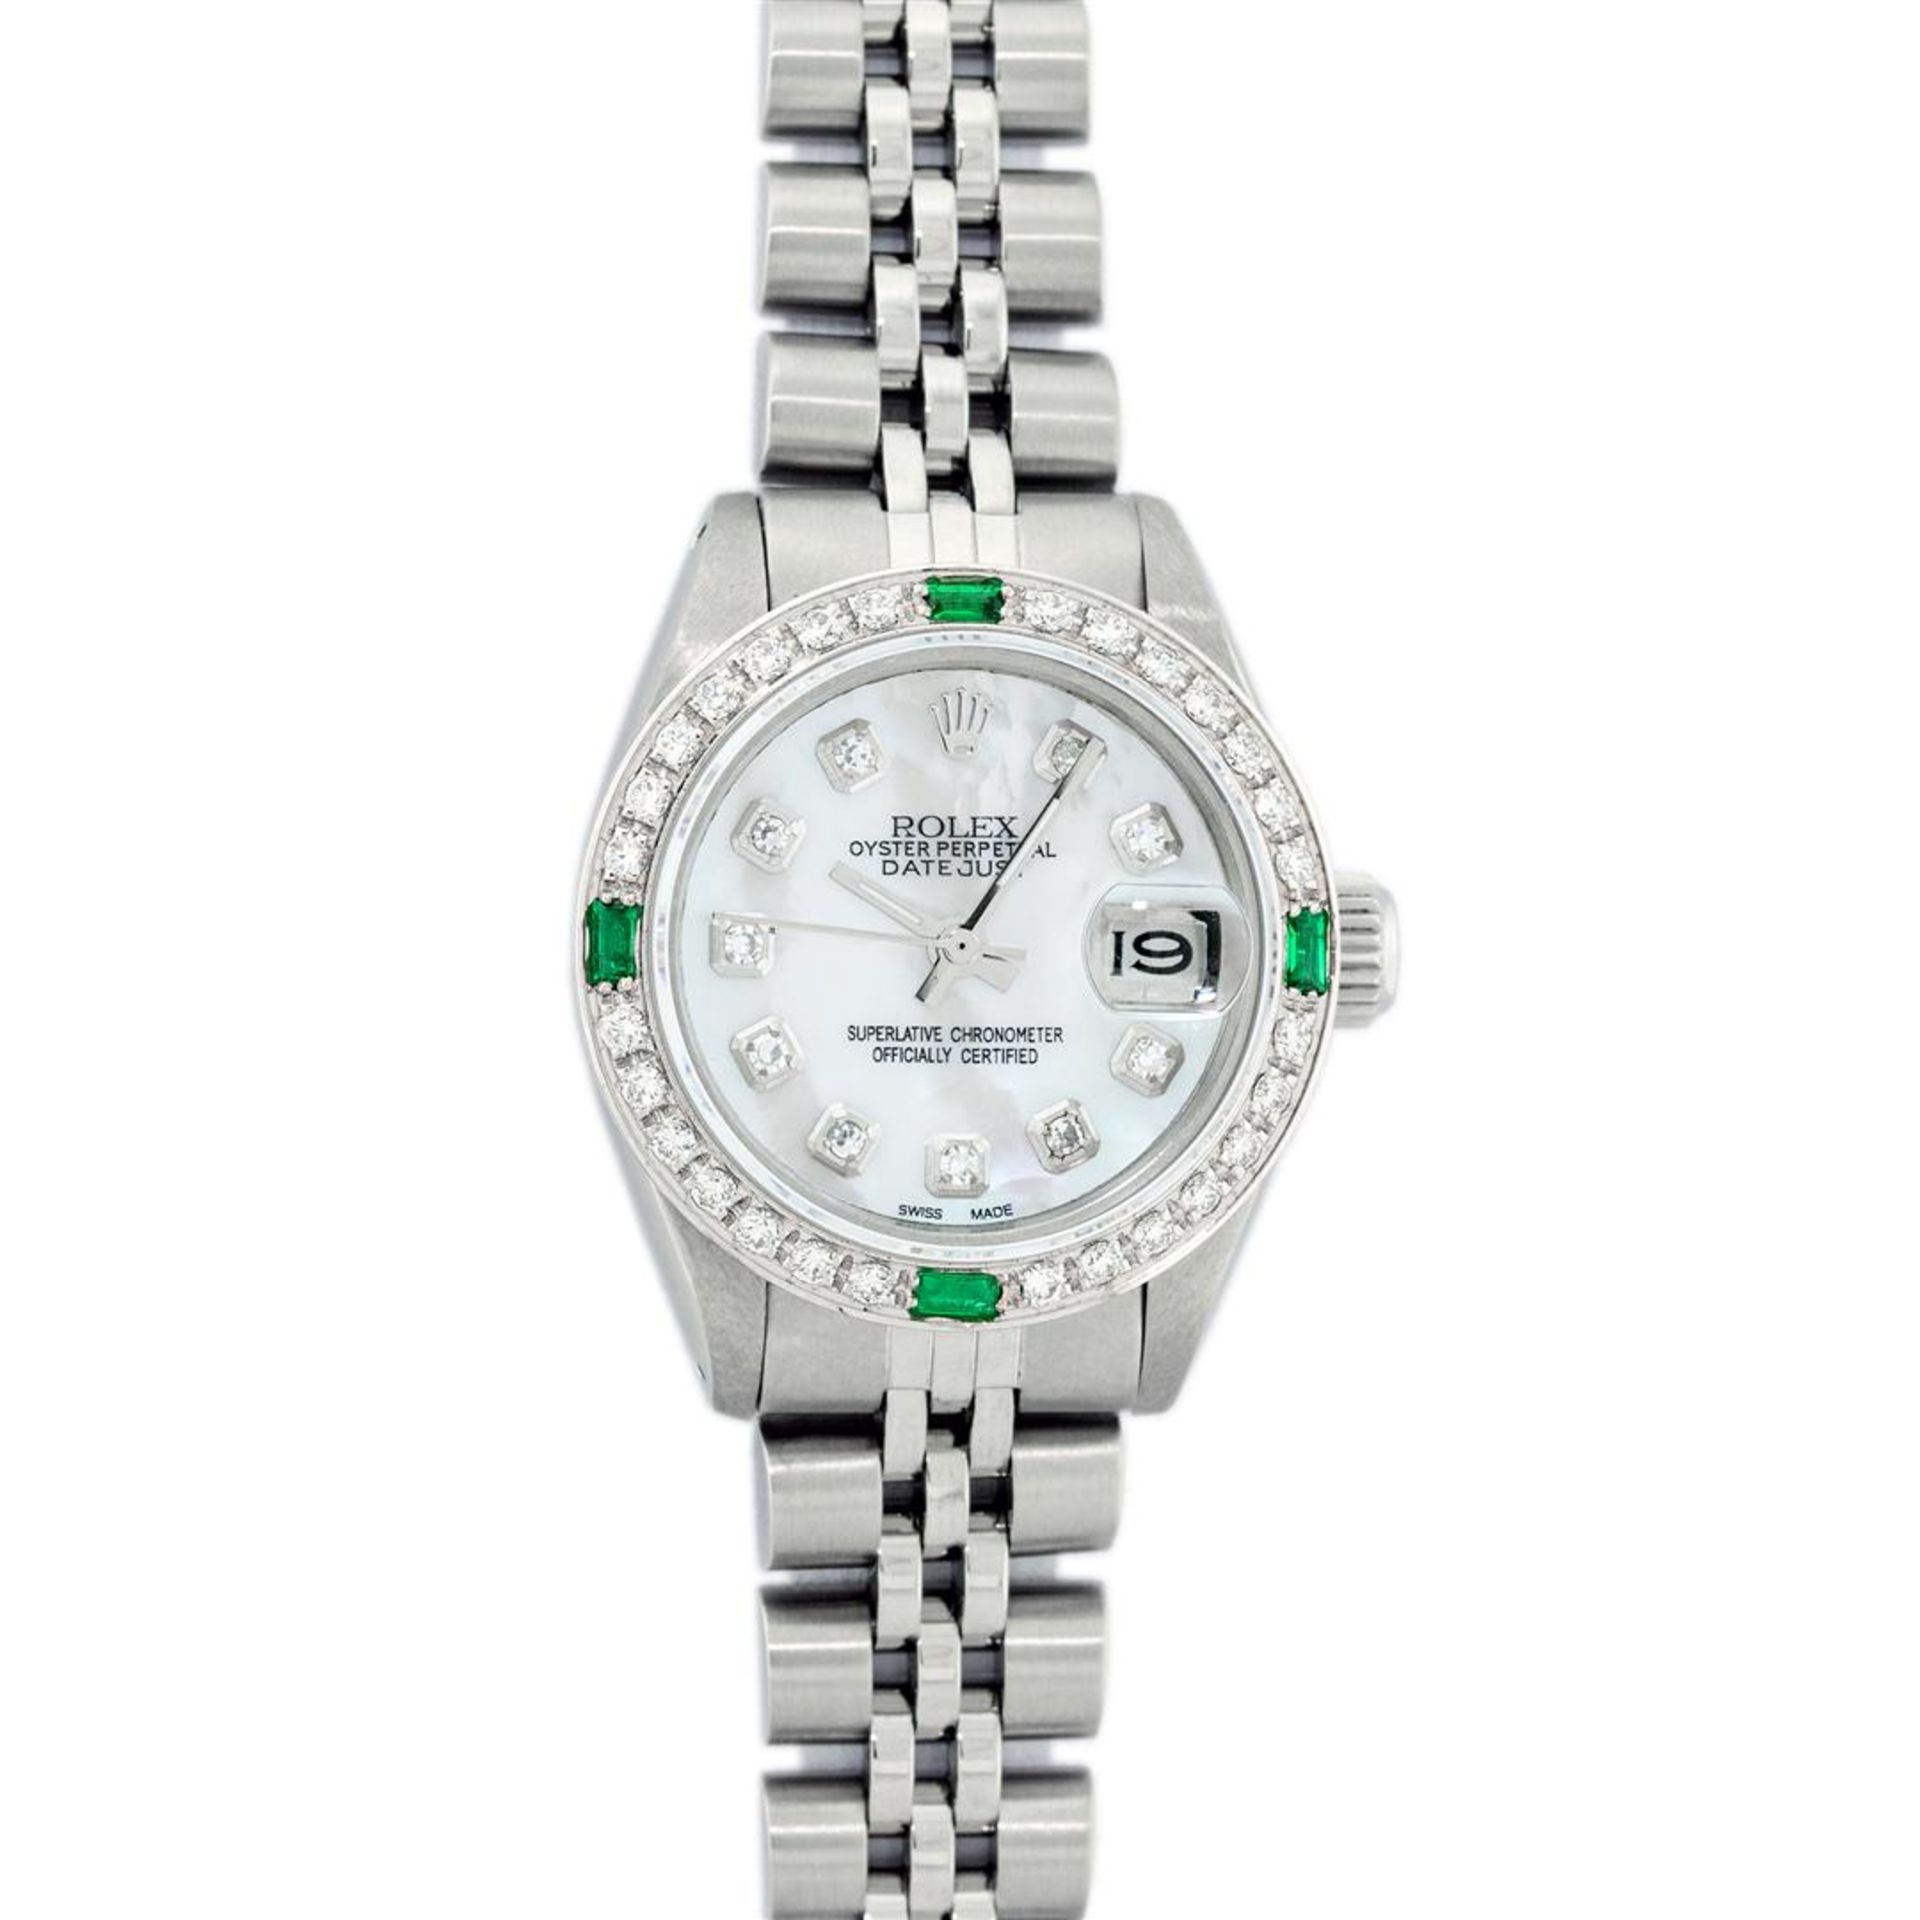 Rolex Ladies Stainless Steel Mother Of Pearl Diamond 26MM Datejust Wristwatch - Image 2 of 9